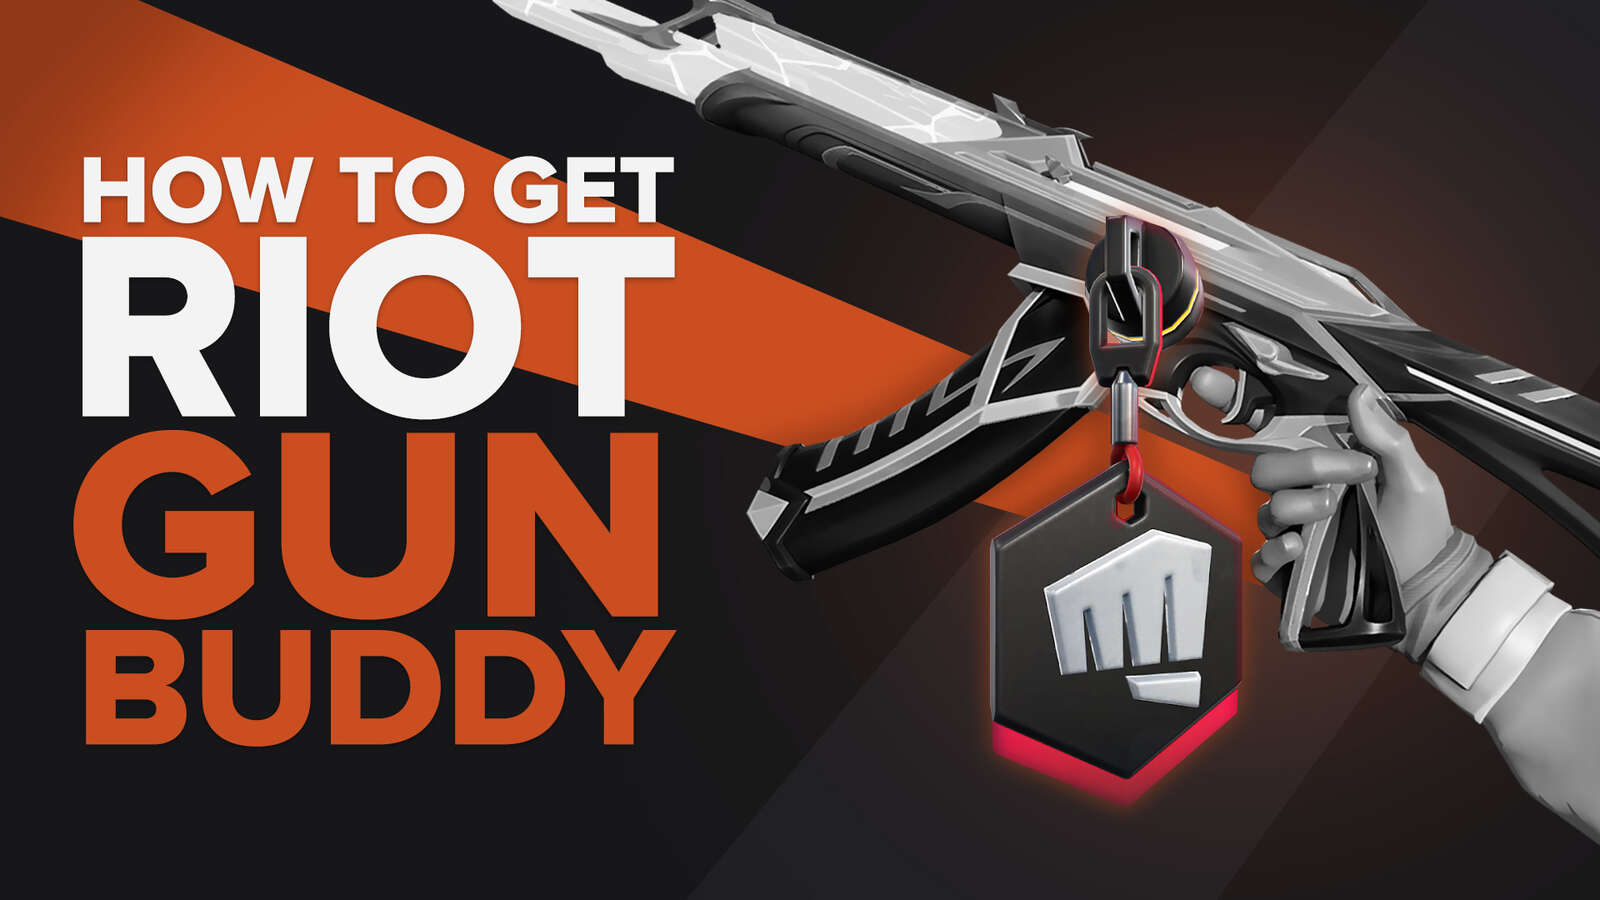 How To Get the Riot Gun Buddy in Valorant [Explained]